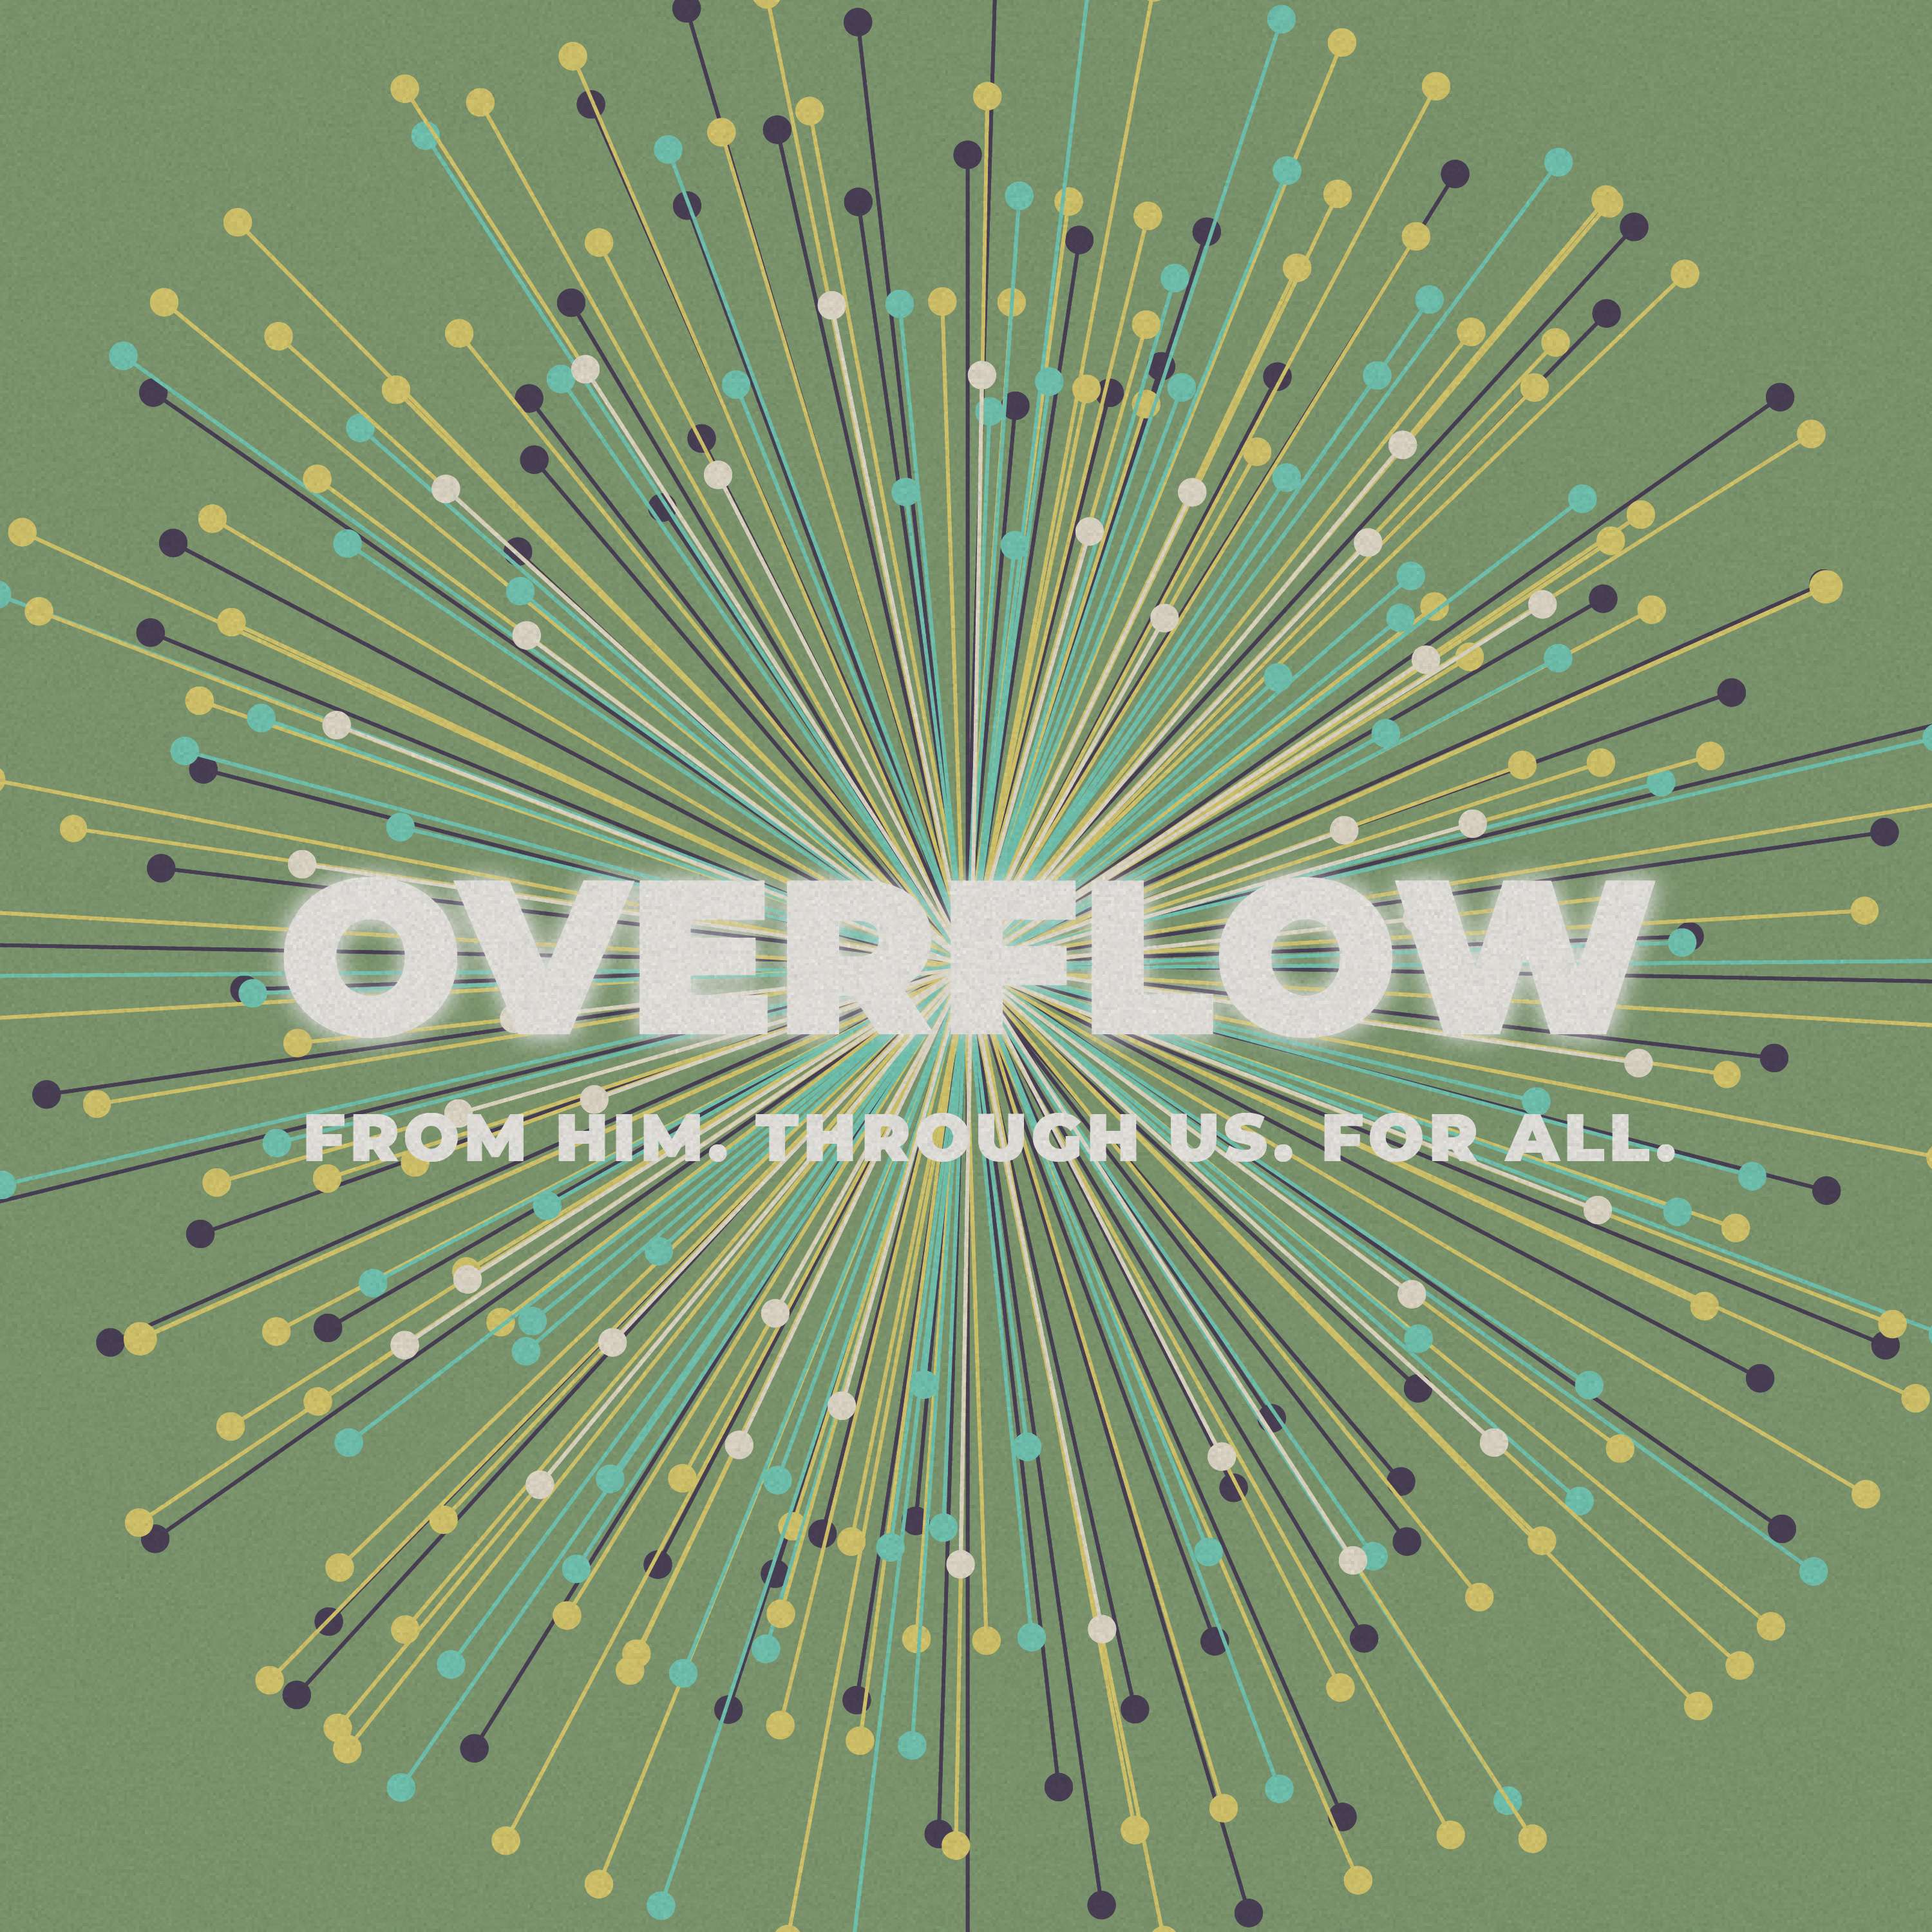 Overflow: From Him, Through Us, For All - Giving & Ministry